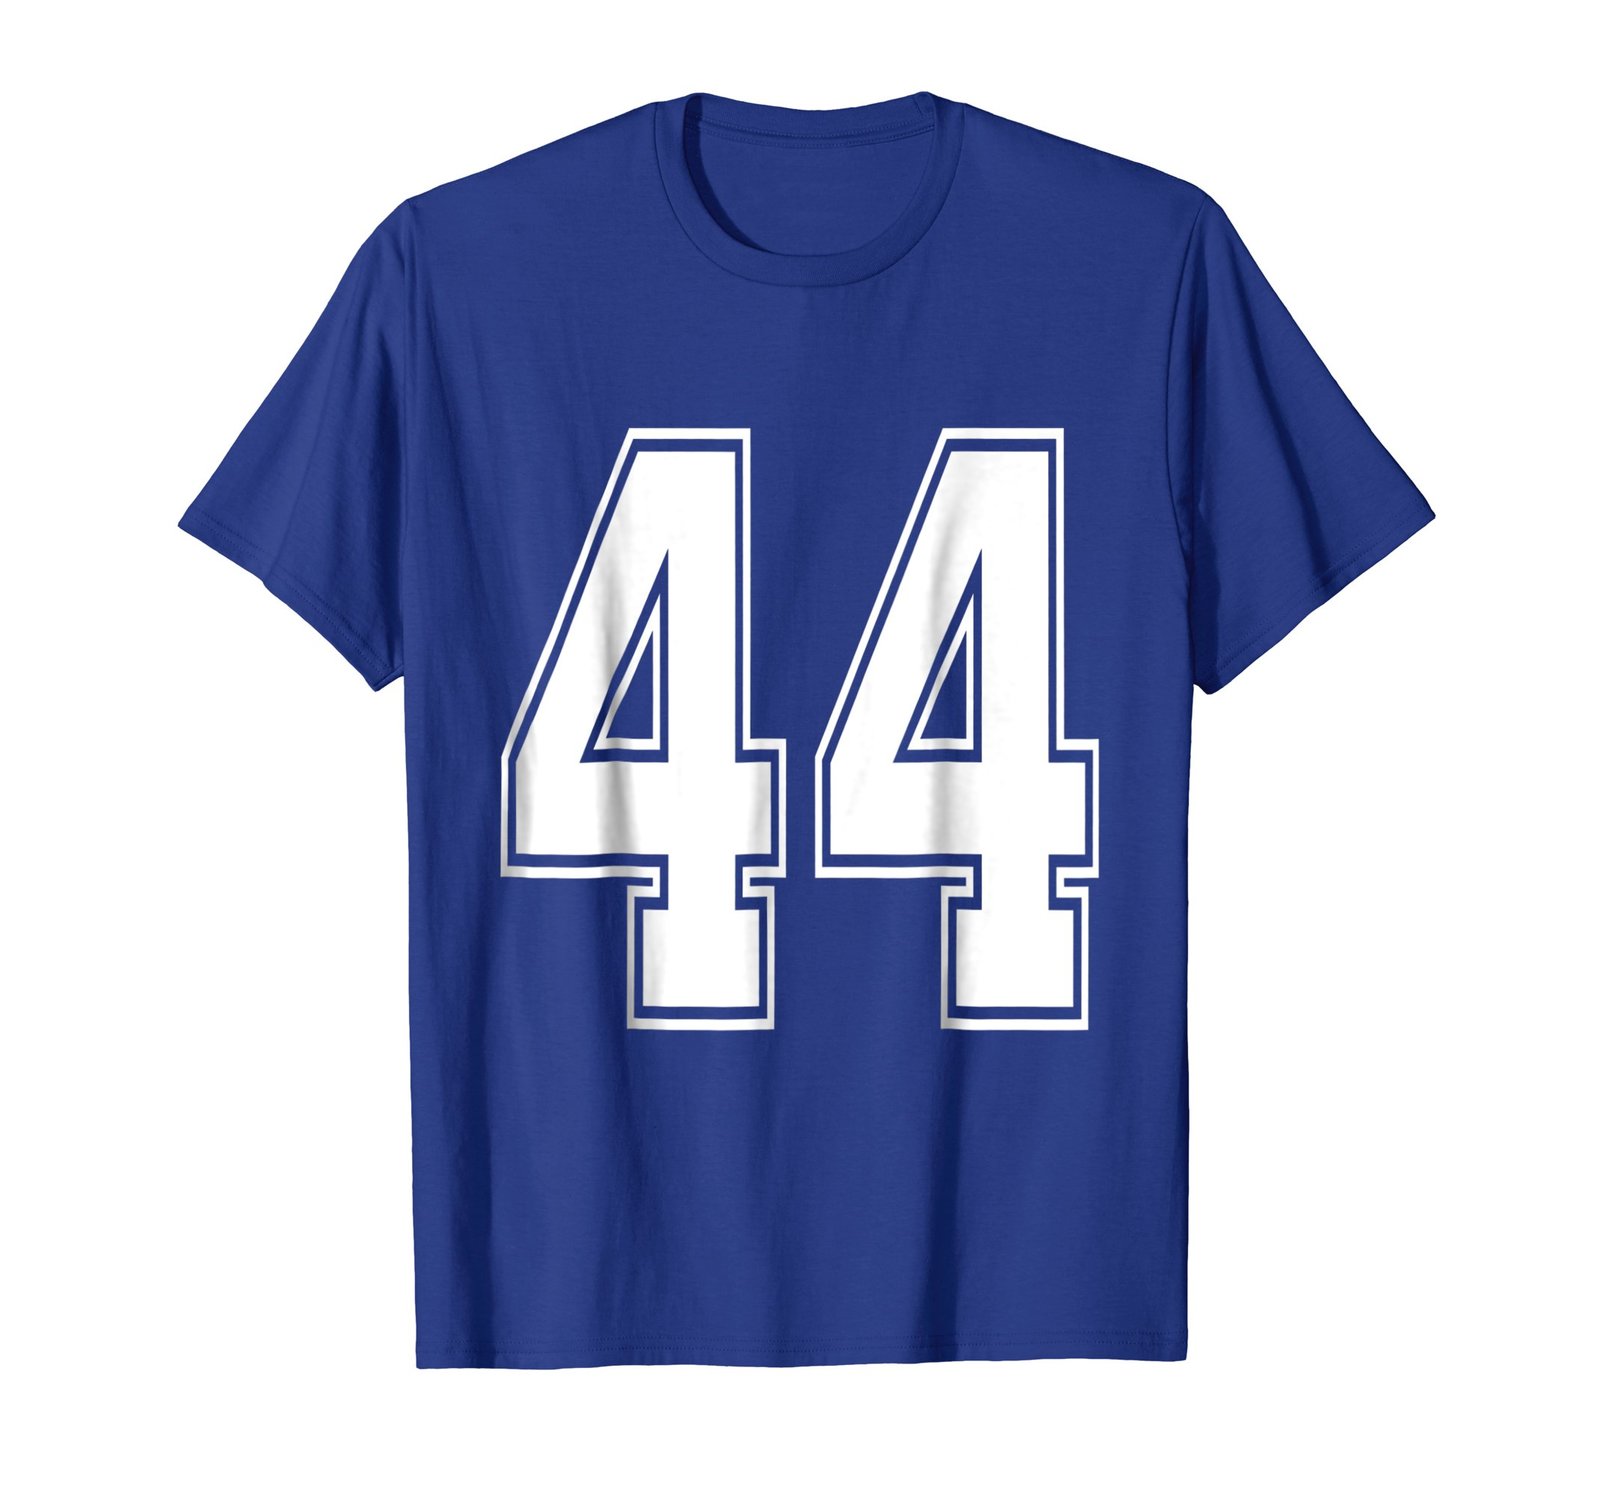 44-number-44-sports-jersey-t-shirt-my-favorite-player-44-t-shirts-tank-tops